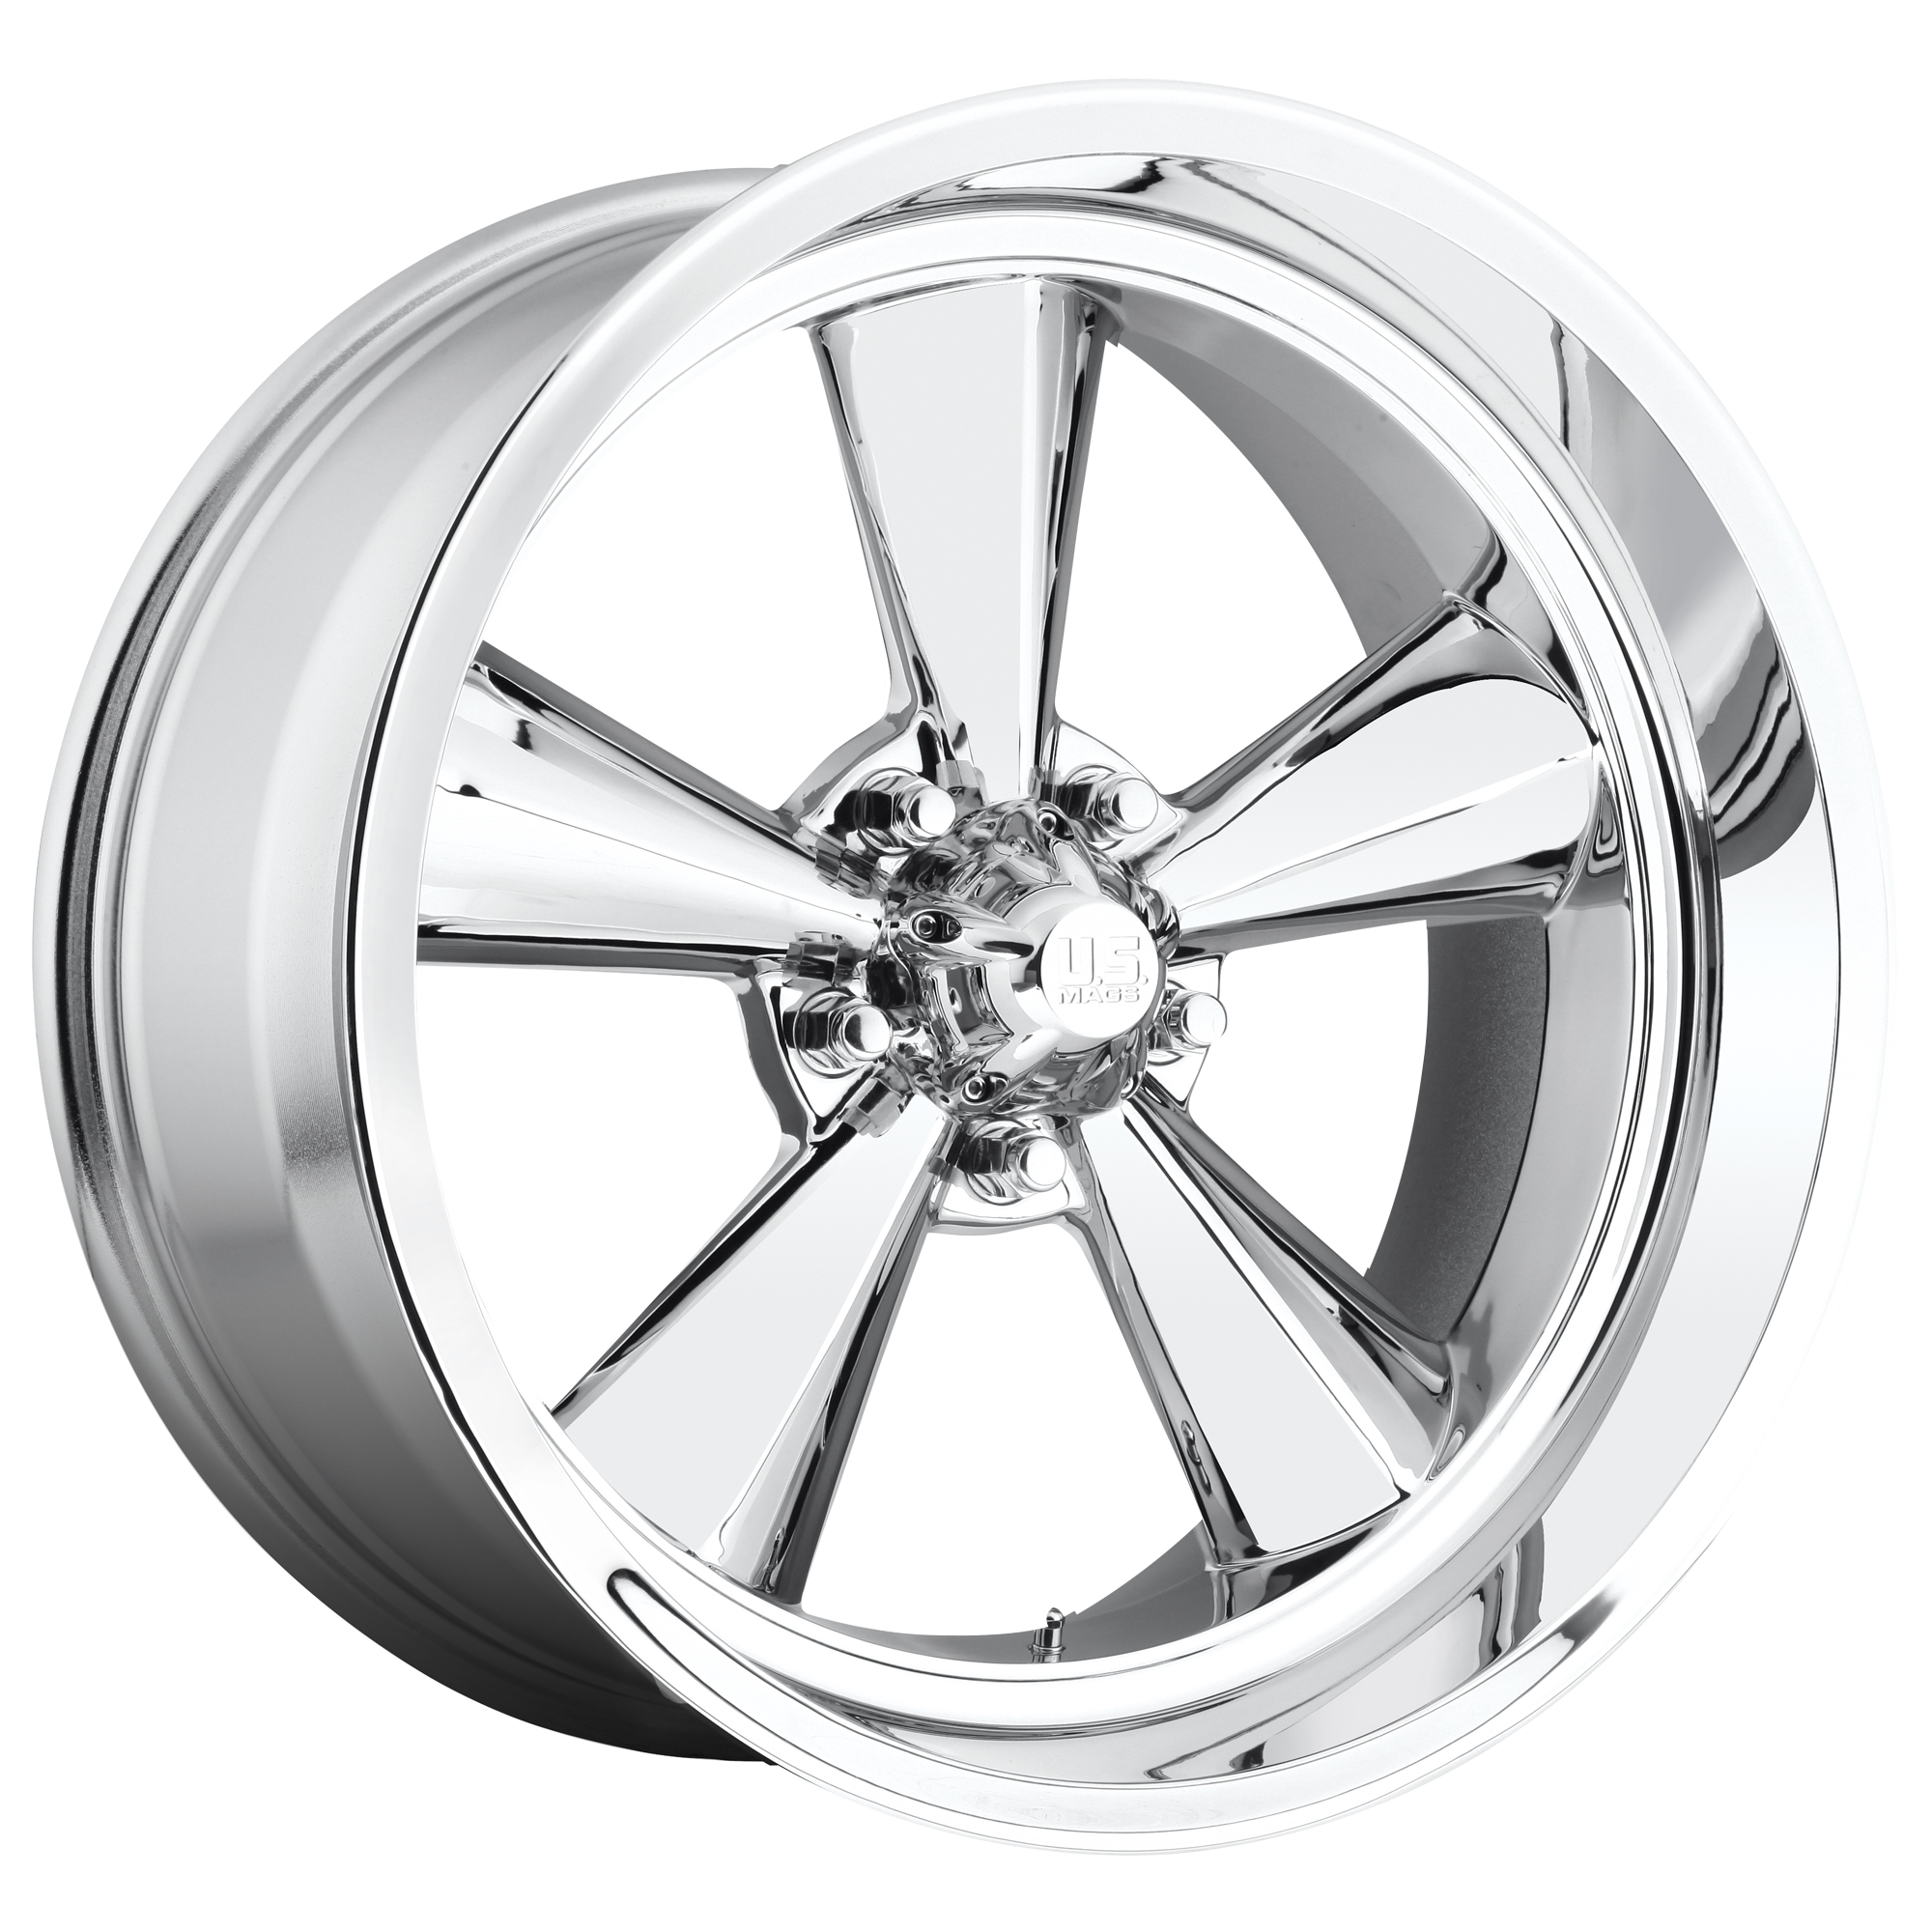 STANDARD 17x8 5x114.30 CHROME PLATED (1 mm) - Tires and Engine Performance